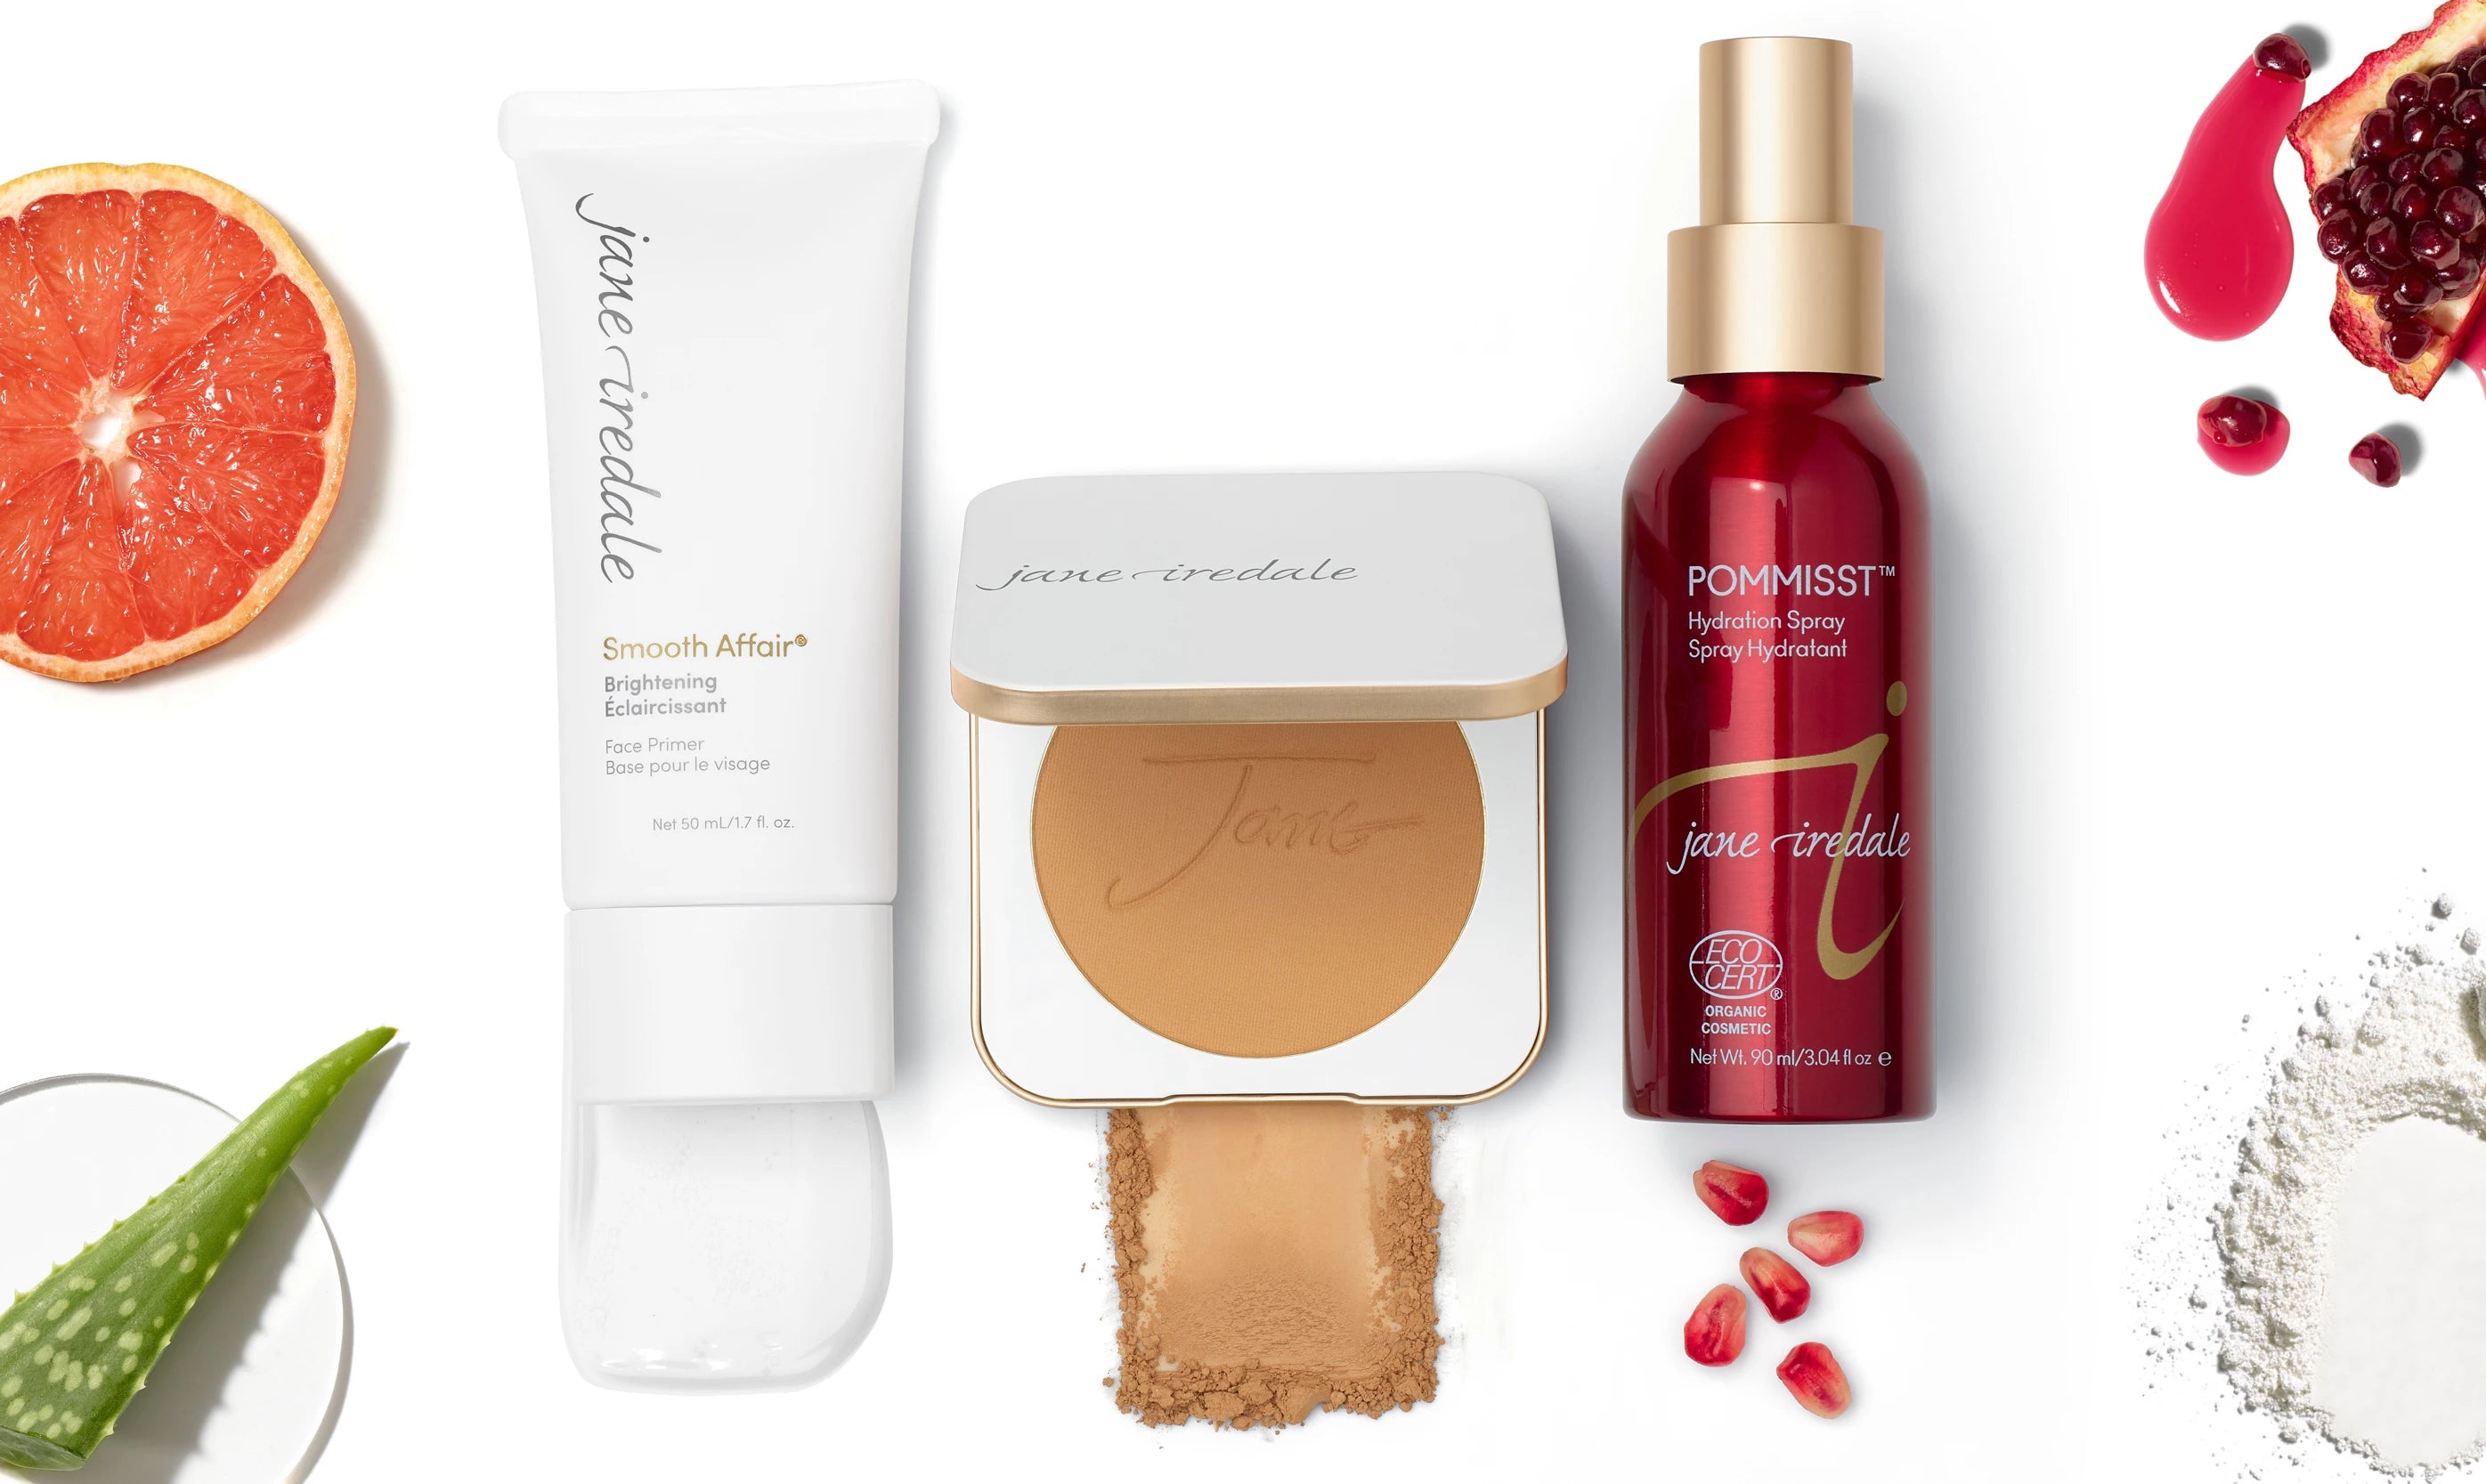 jane iredale mineral makeup formulas with clean ingredients sourced from nature